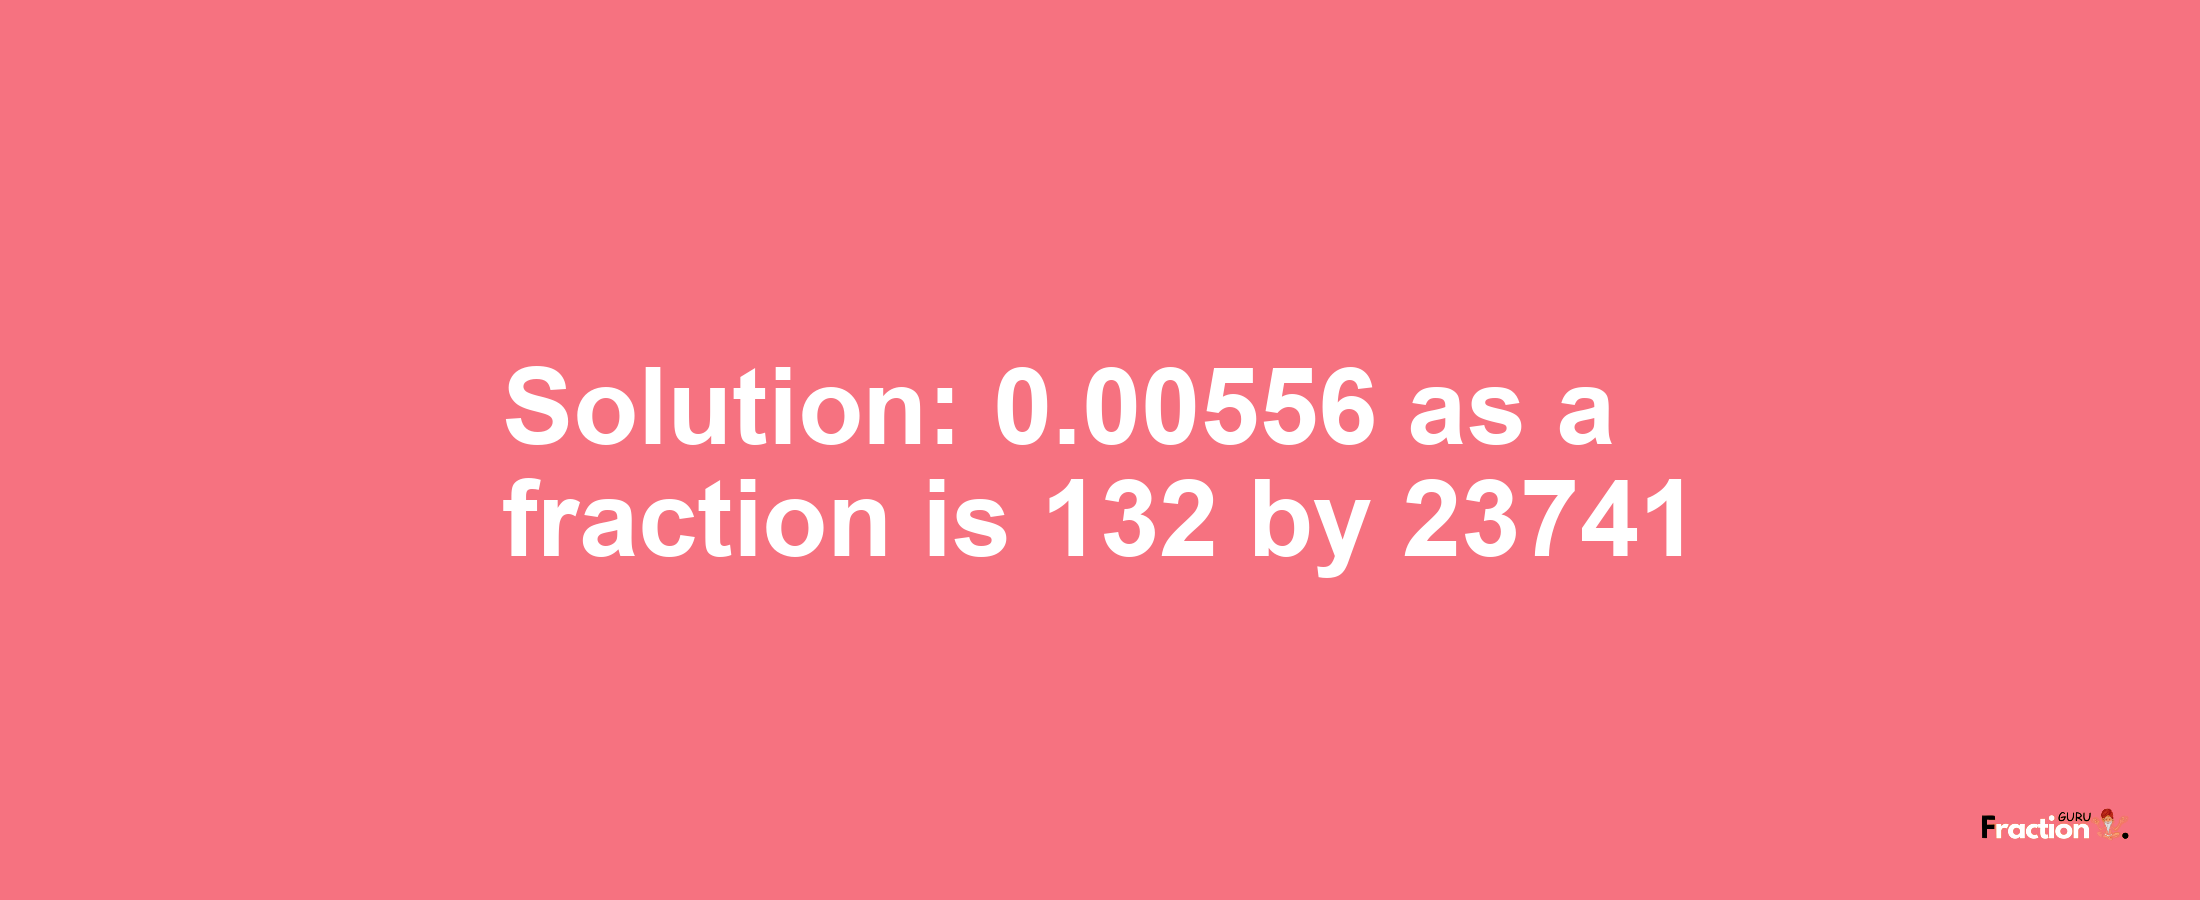 Solution:0.00556 as a fraction is 132/23741